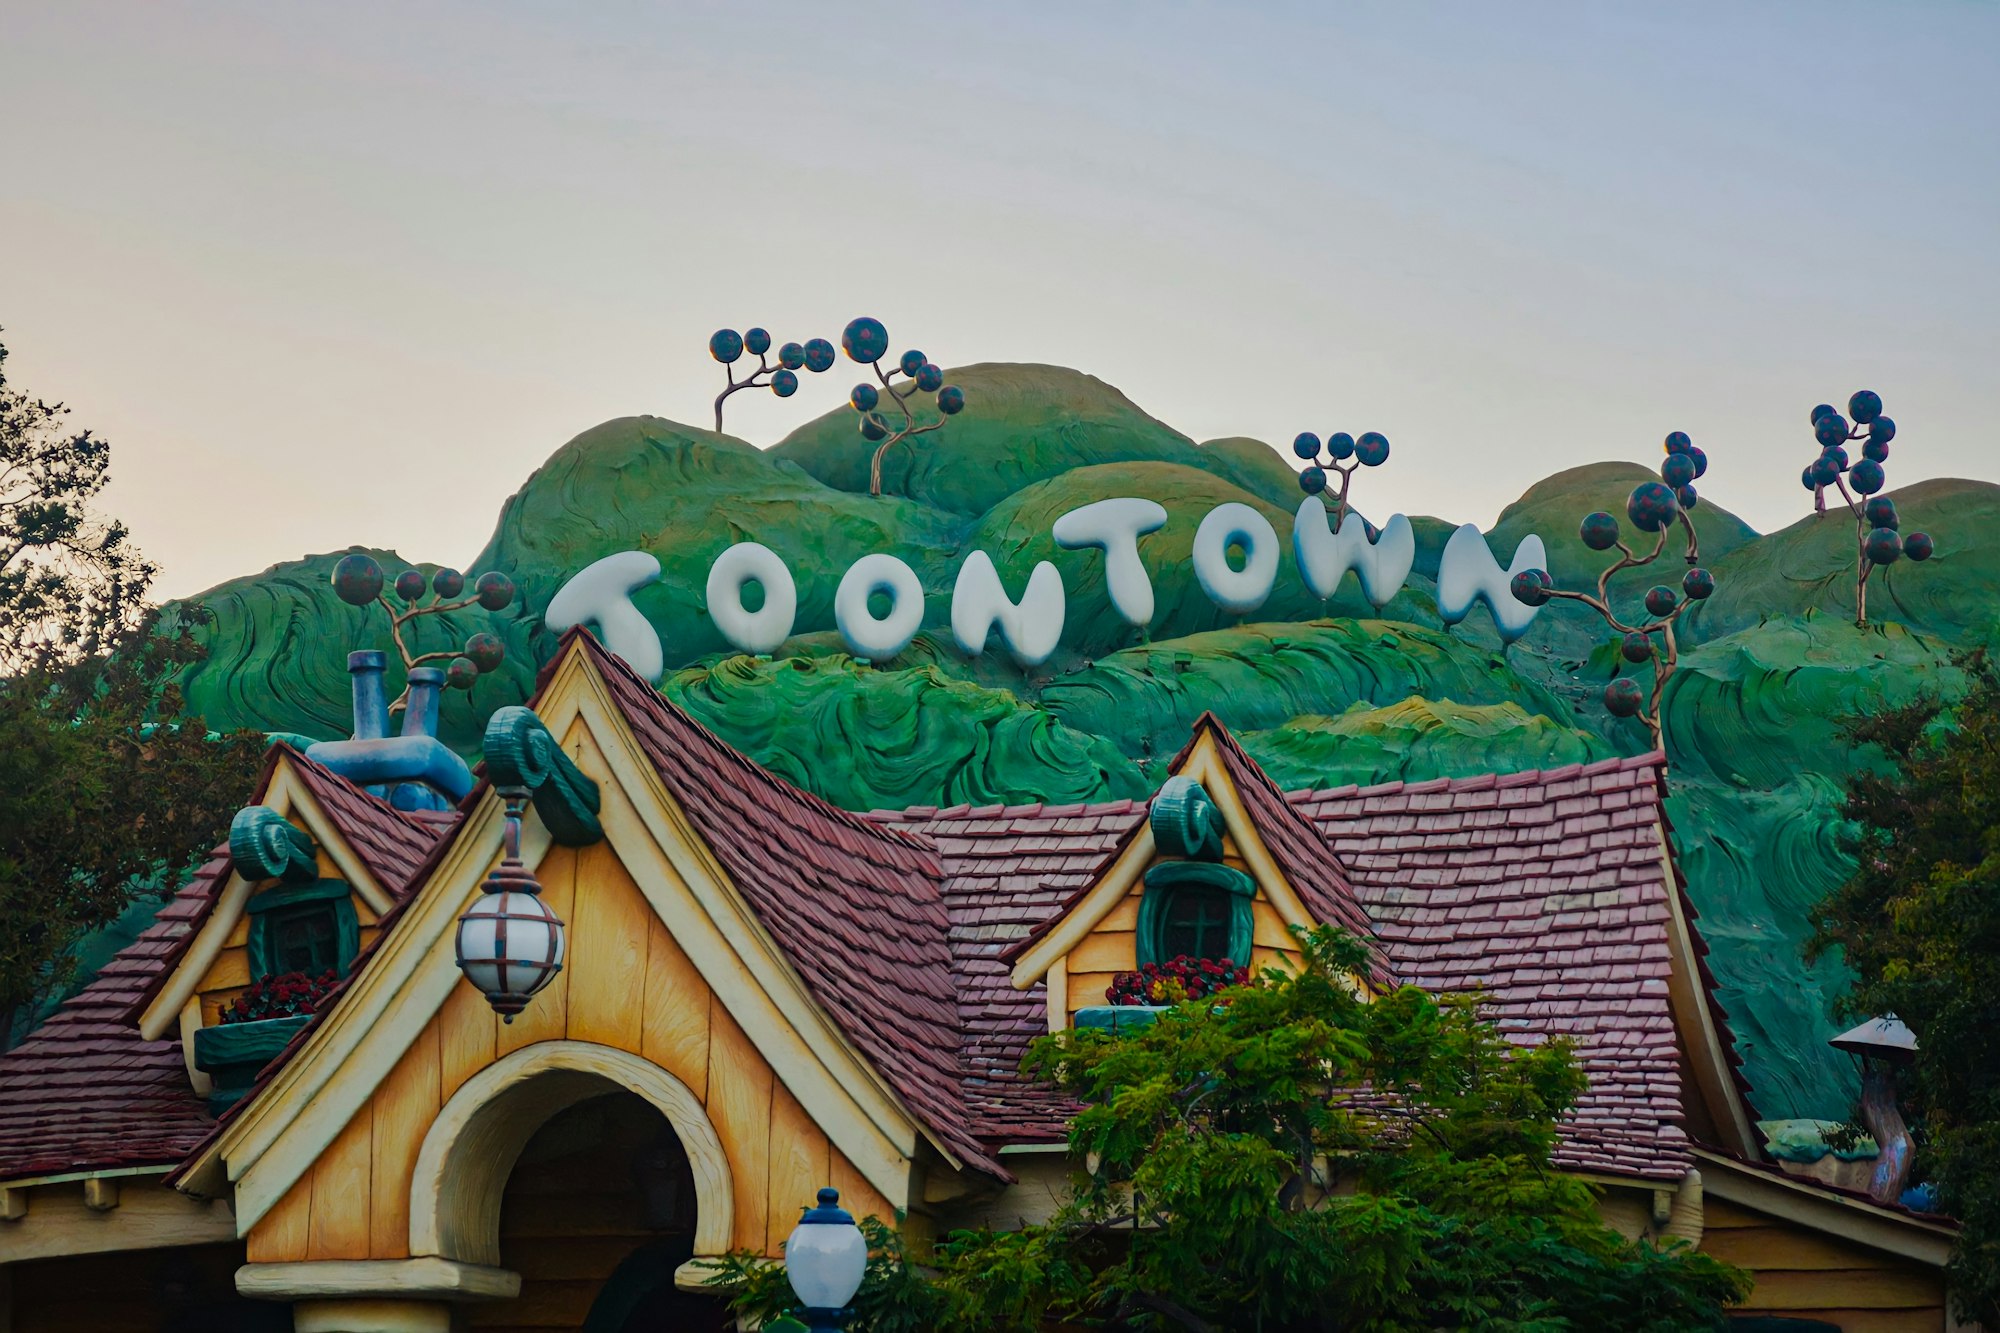 A picture of Mickey's Toontown at Disneyland Park.